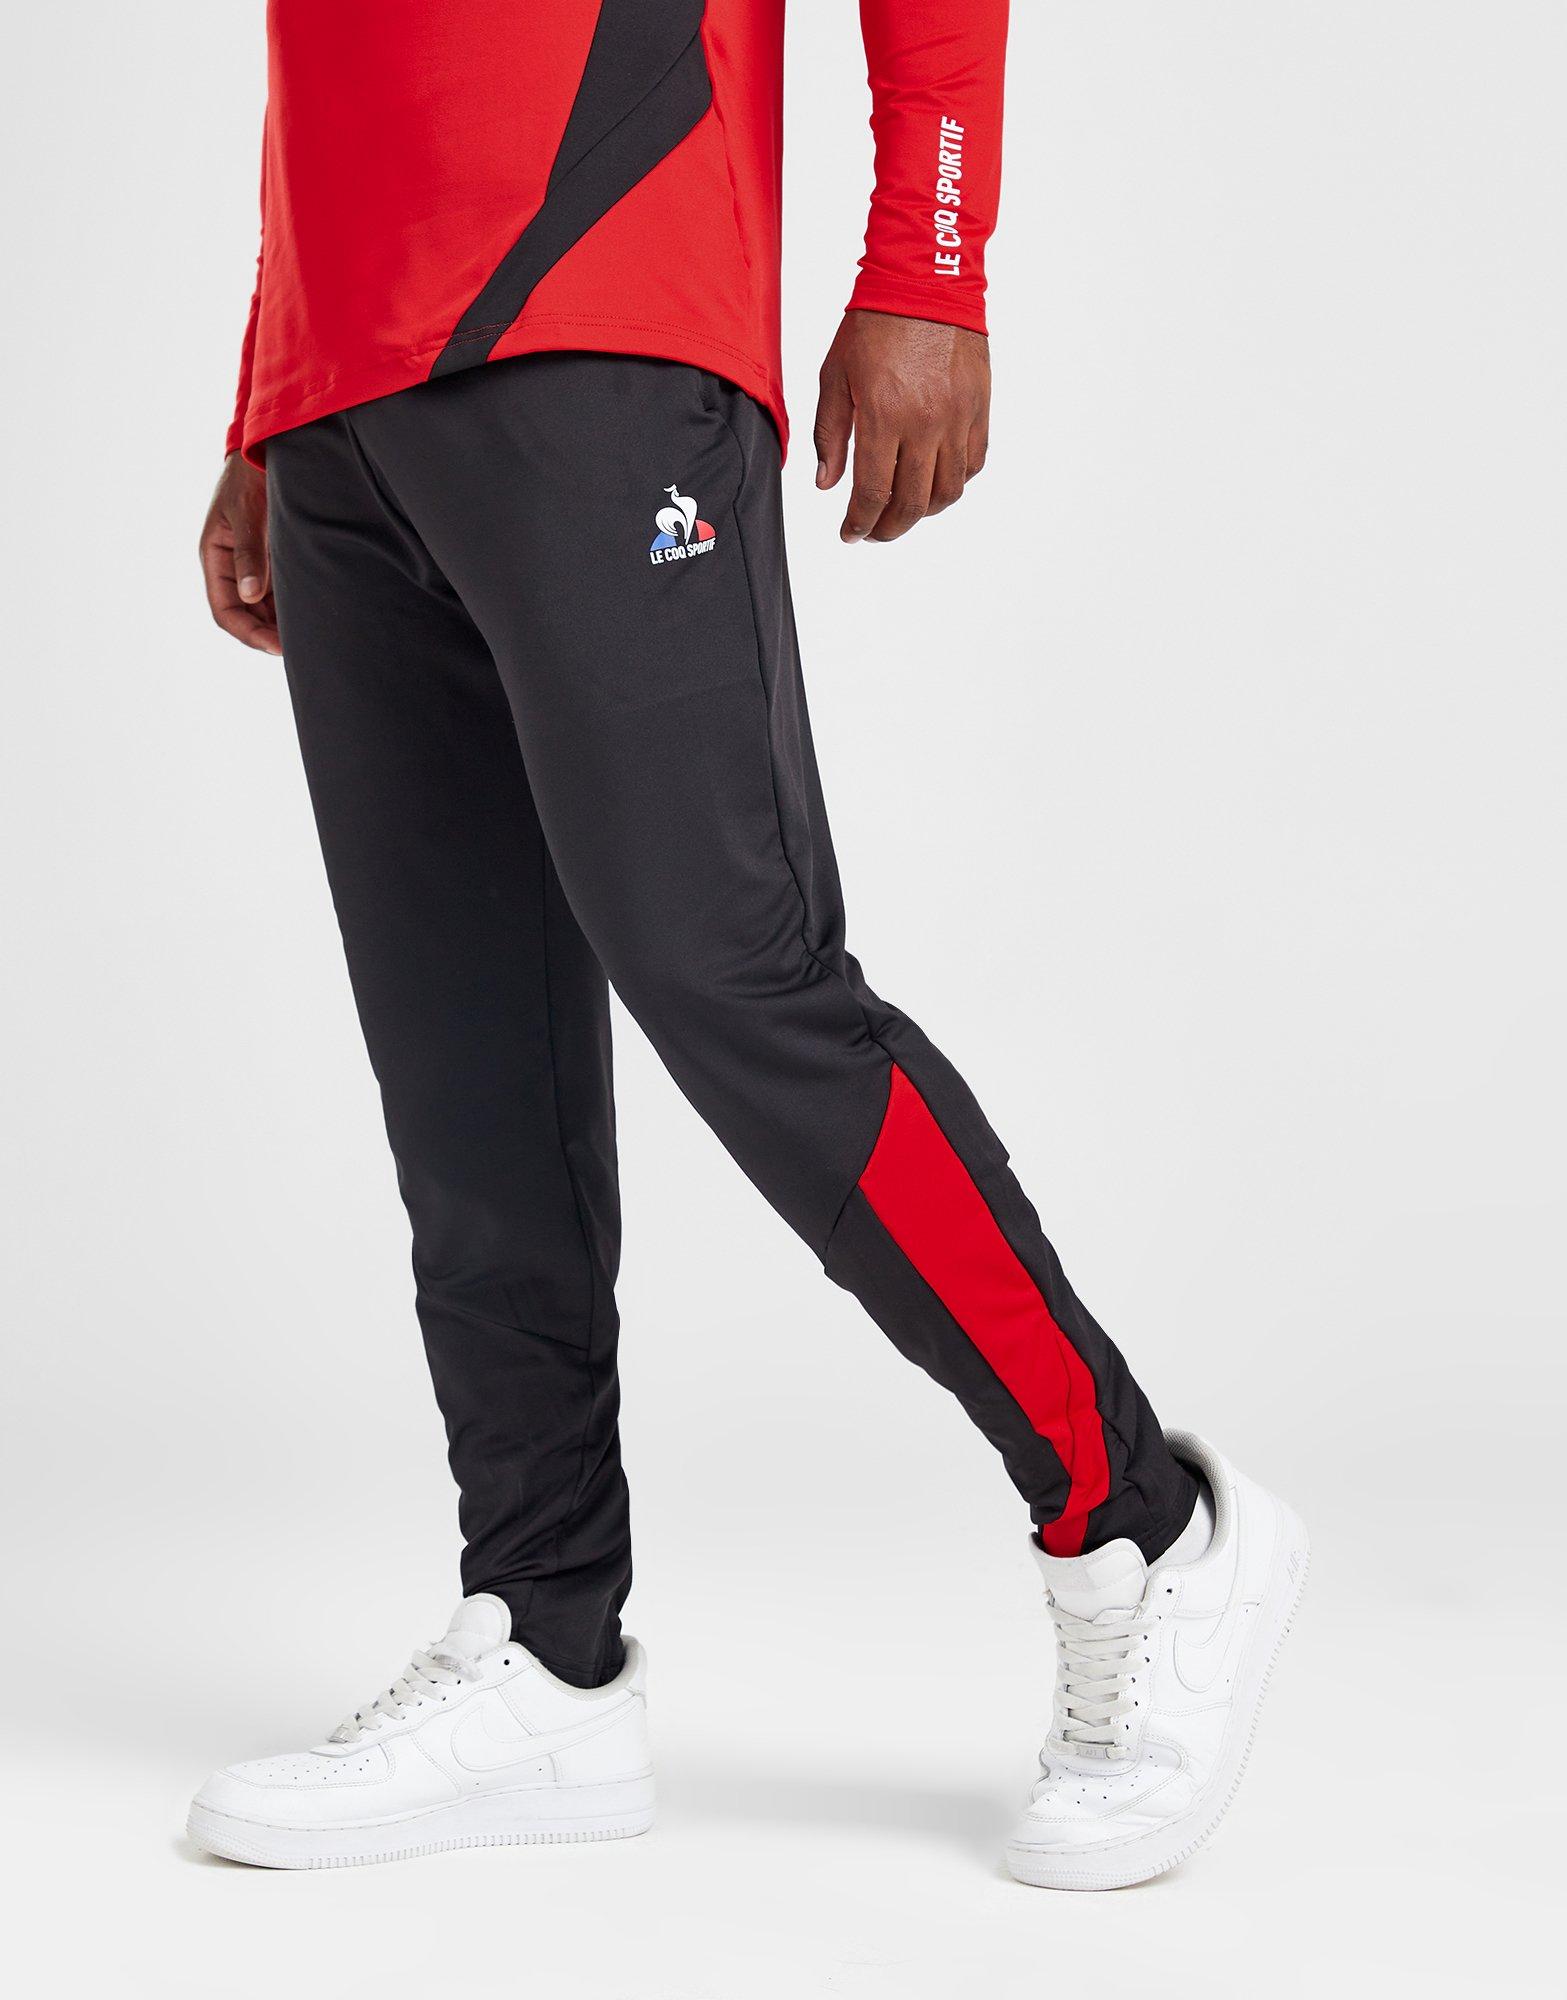 en] Outfits and Tracksuits - Le Coq Sportif